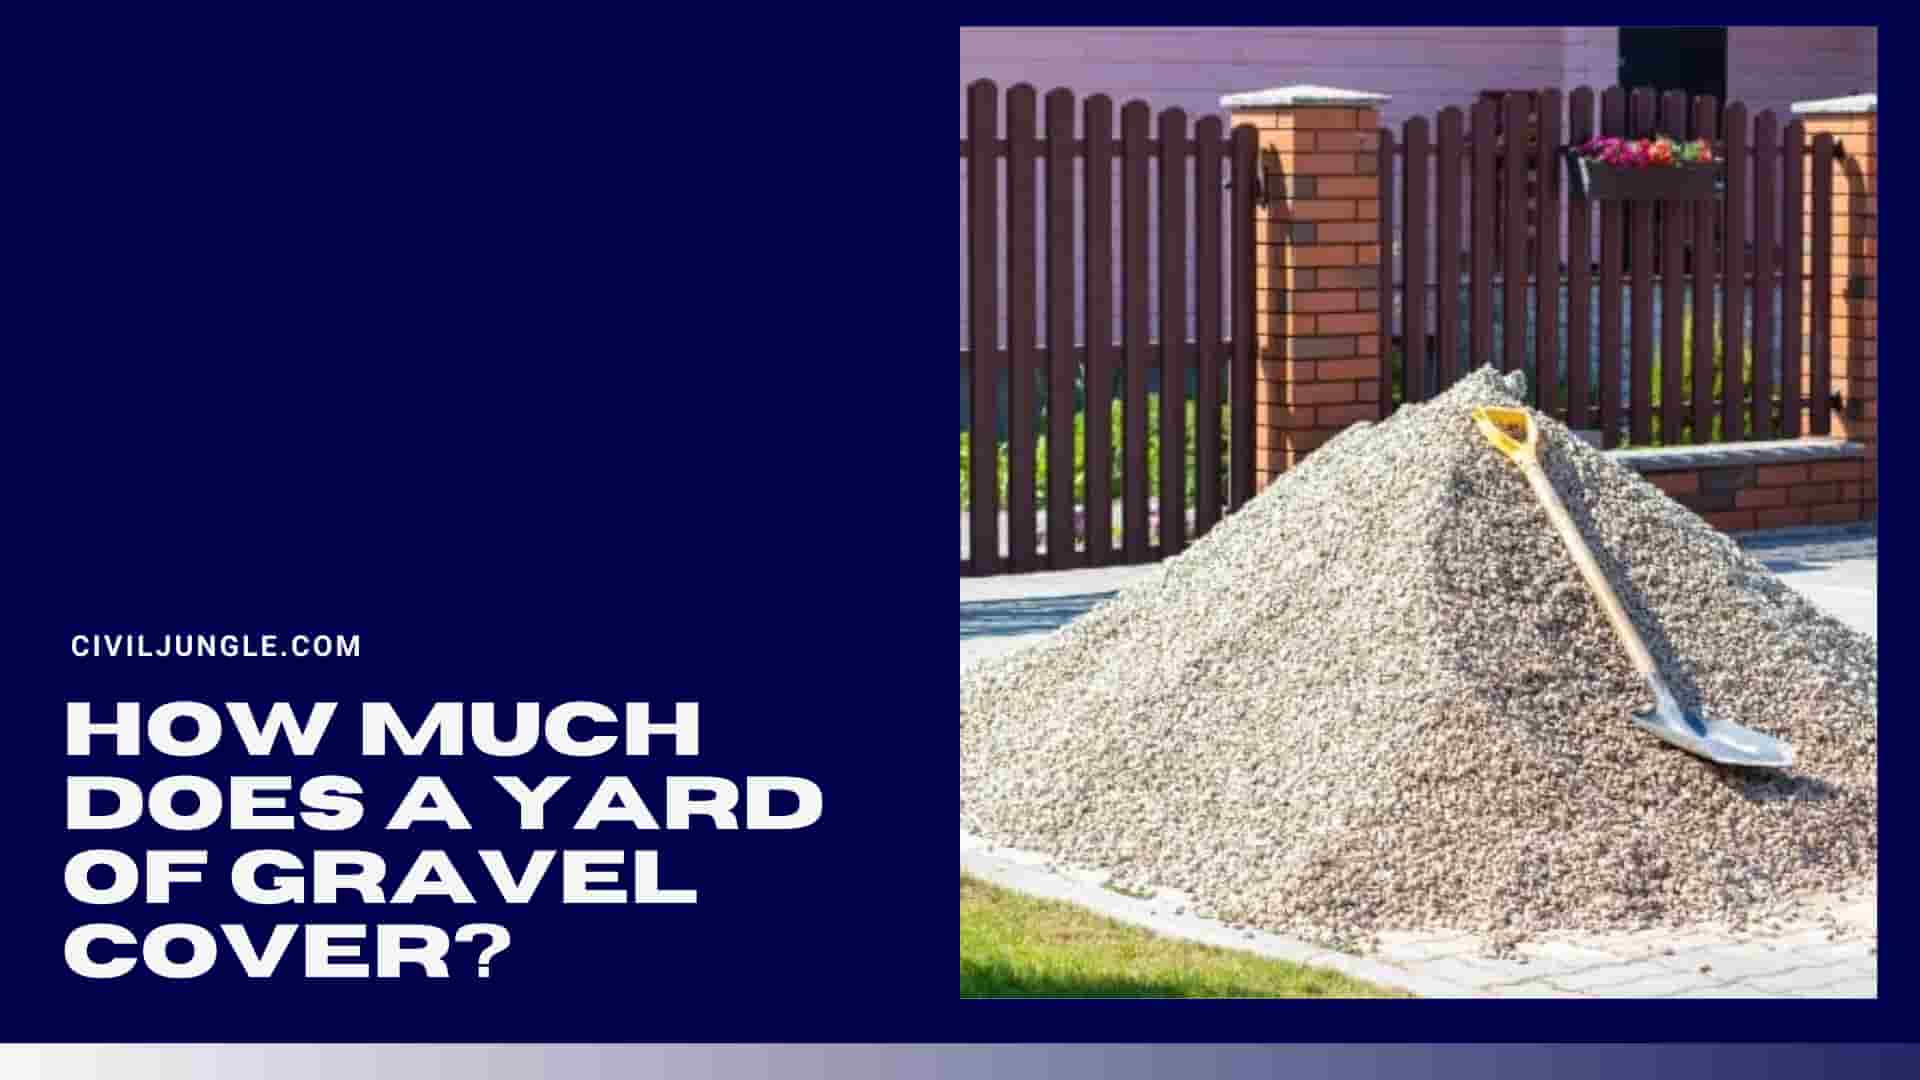 How Much Does a Yard of Gravel Cover?